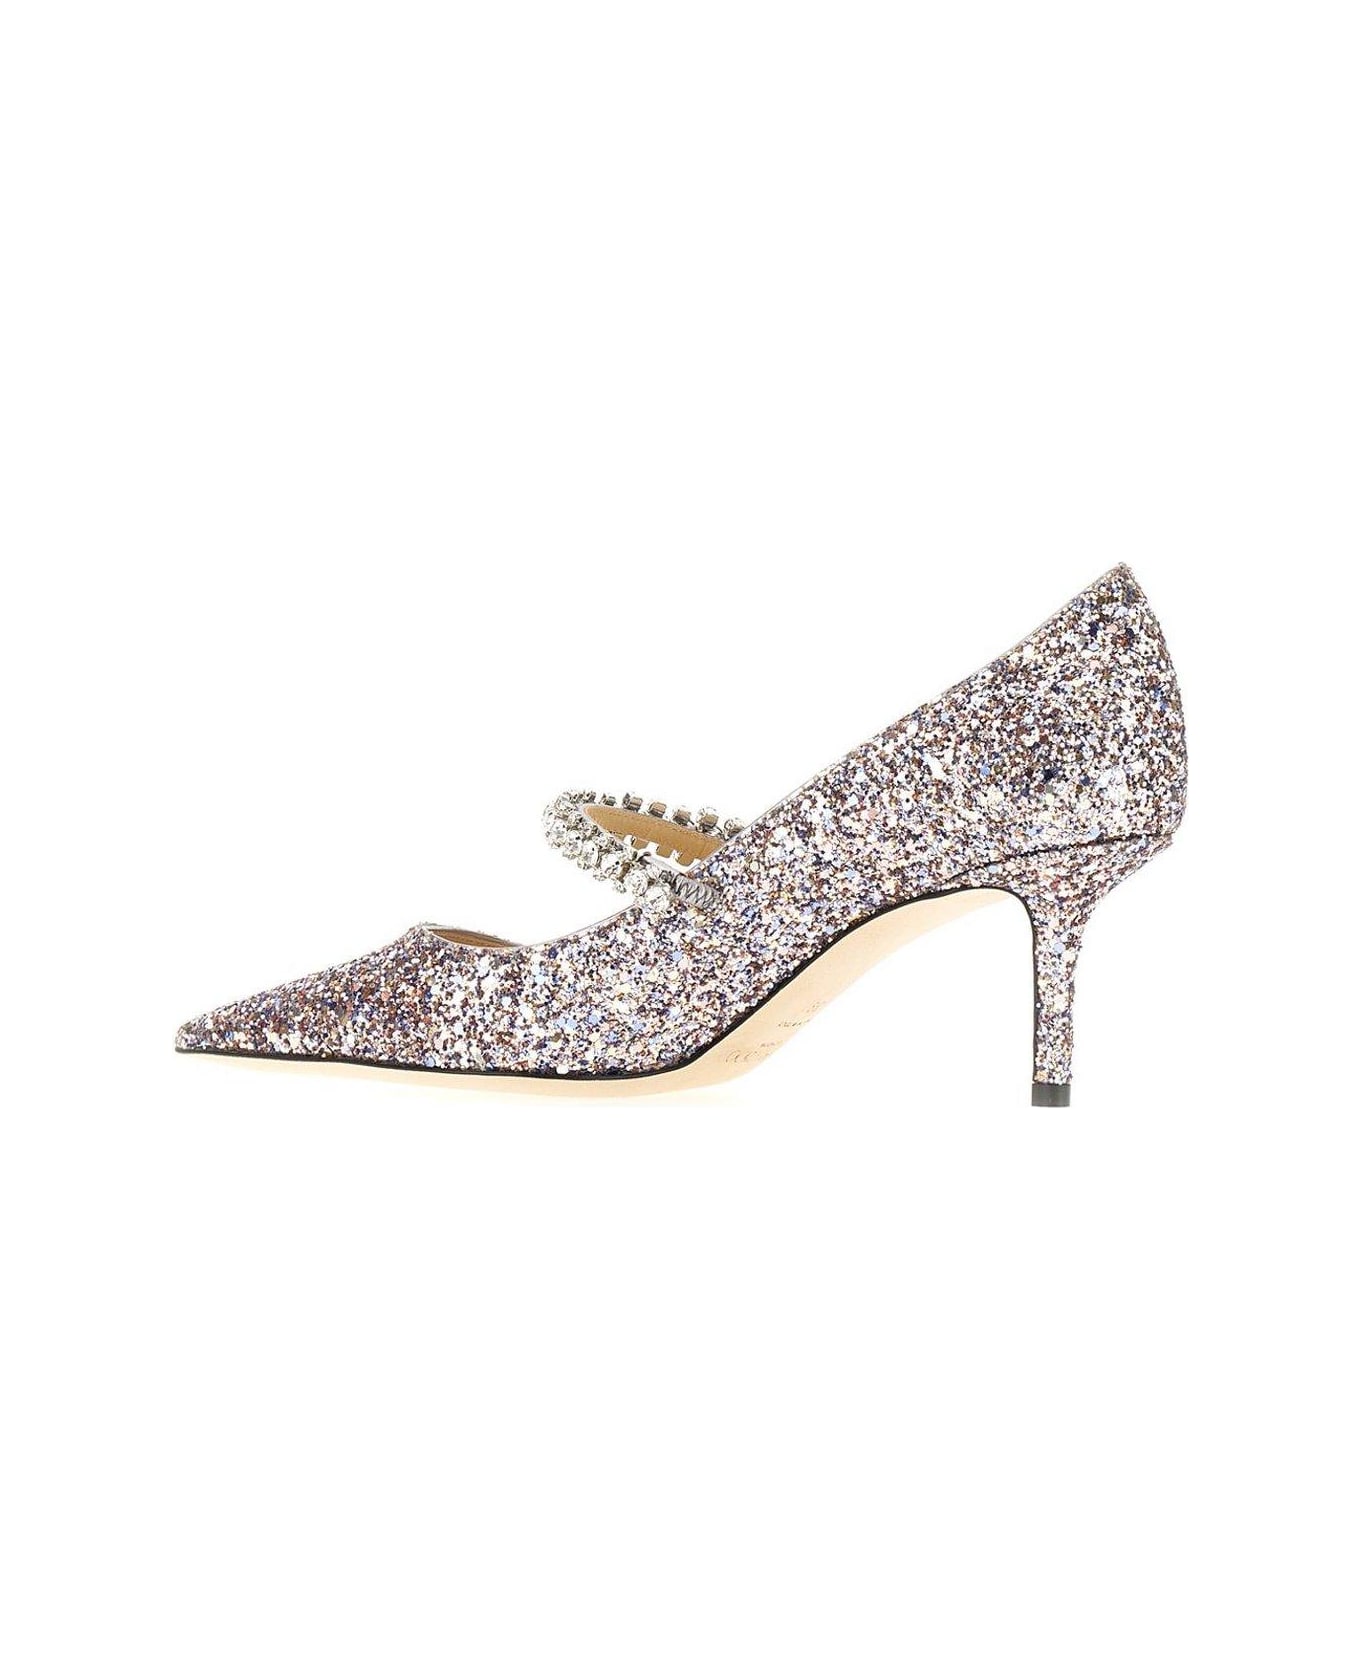 Jimmy Choo Glittered Pointed Toe Pumps - Pink